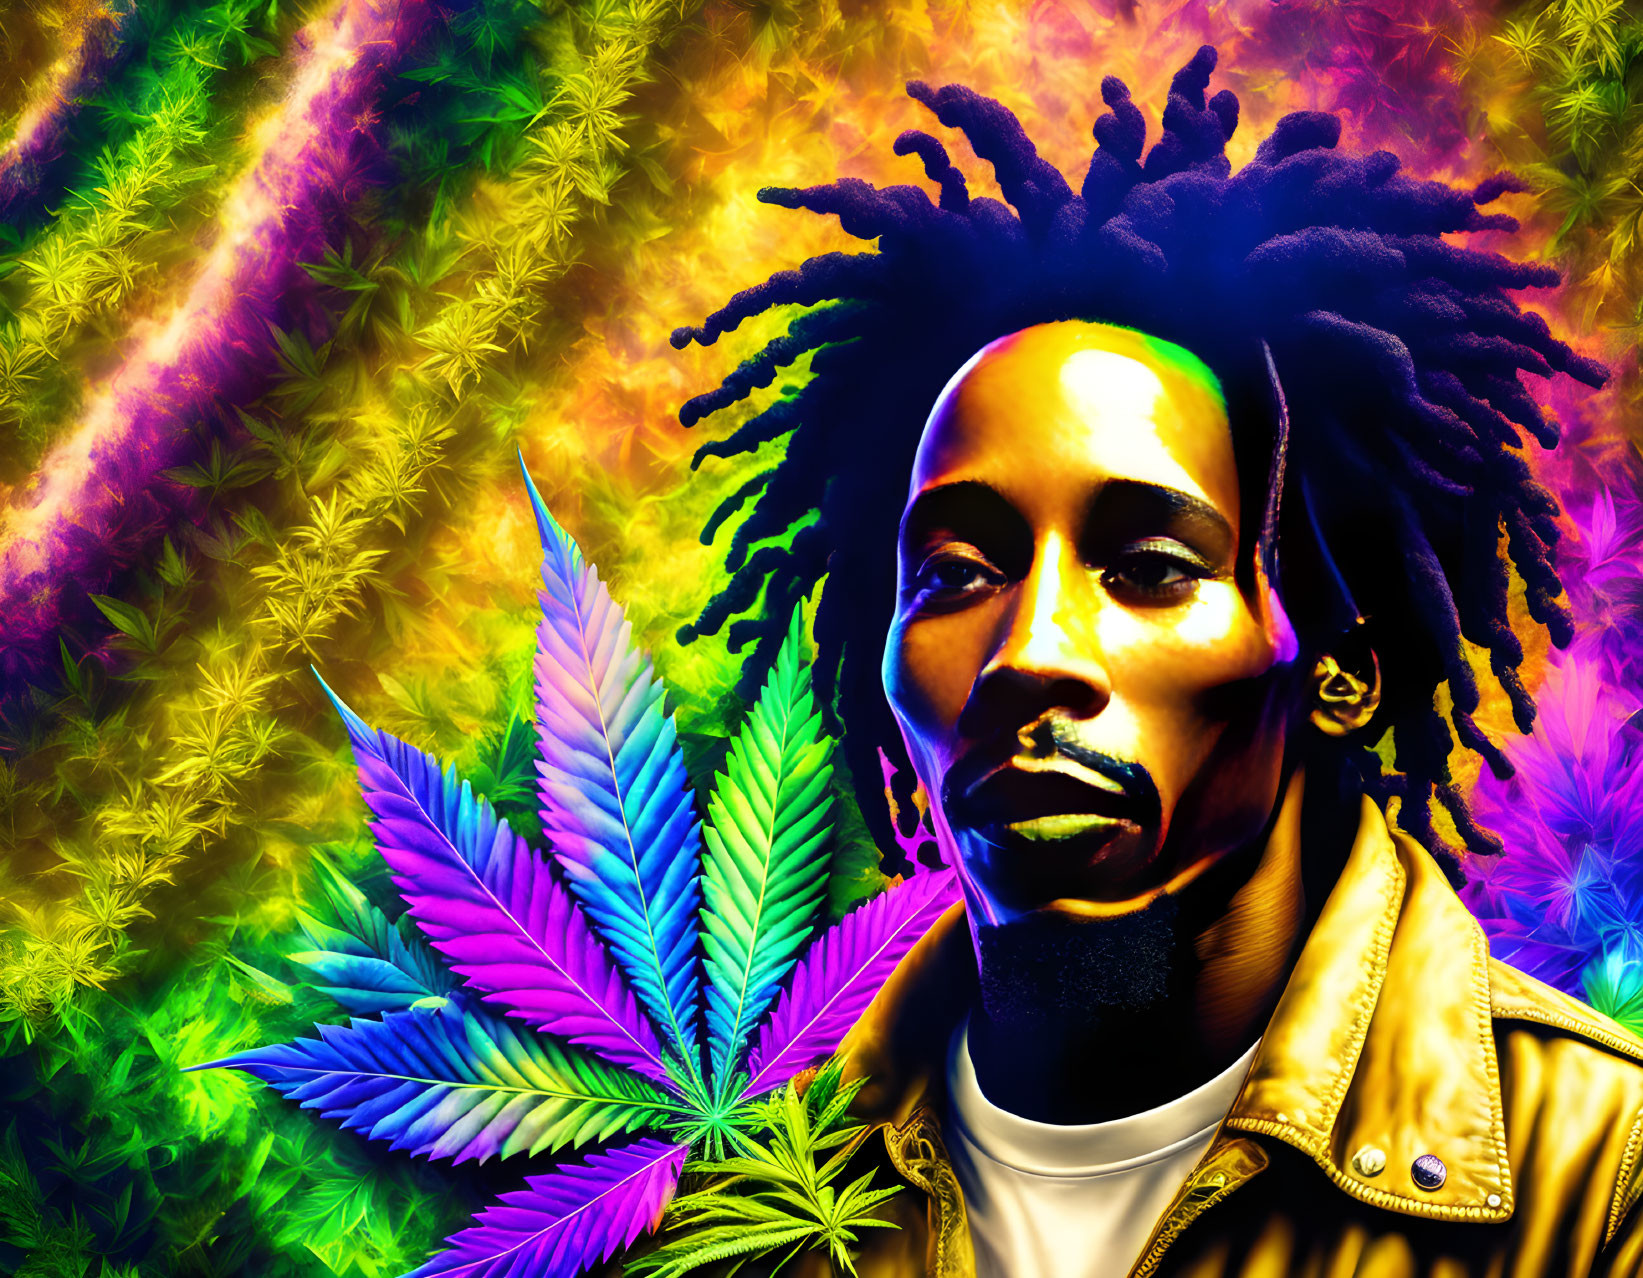 Colorful digital artwork: person with dreadlocks in cannabis-themed setting